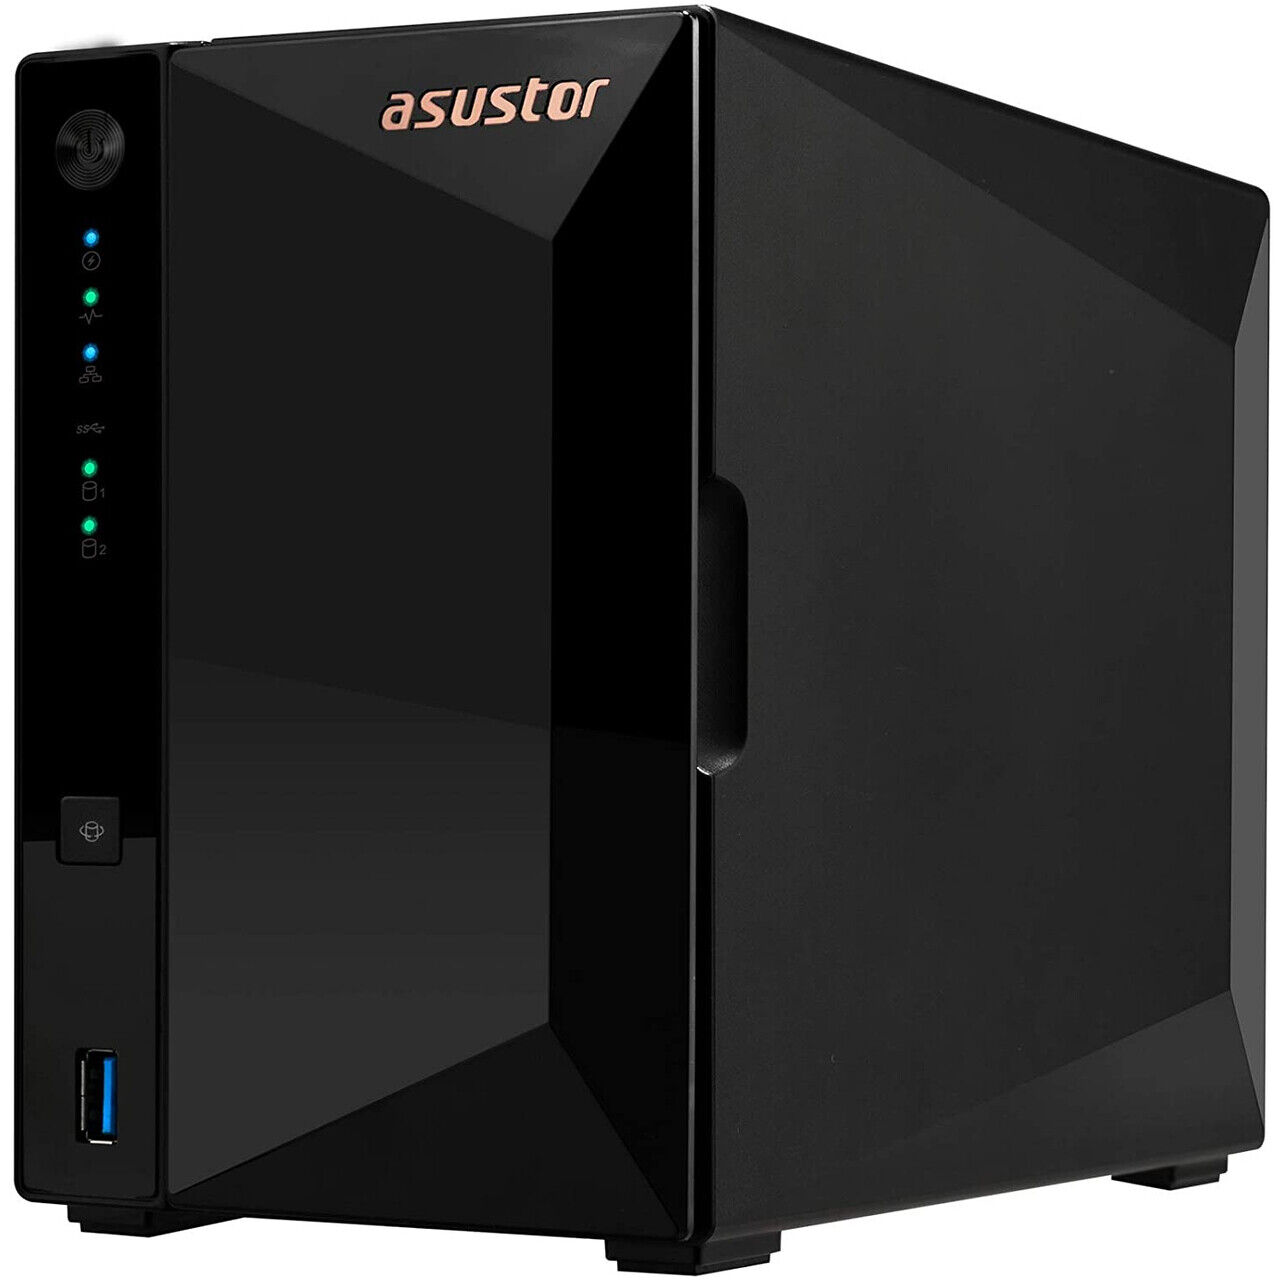 Asustor AS3302T Drivestor 2 Pro Network Attached Storage,1.4GHz Quad, DDR4